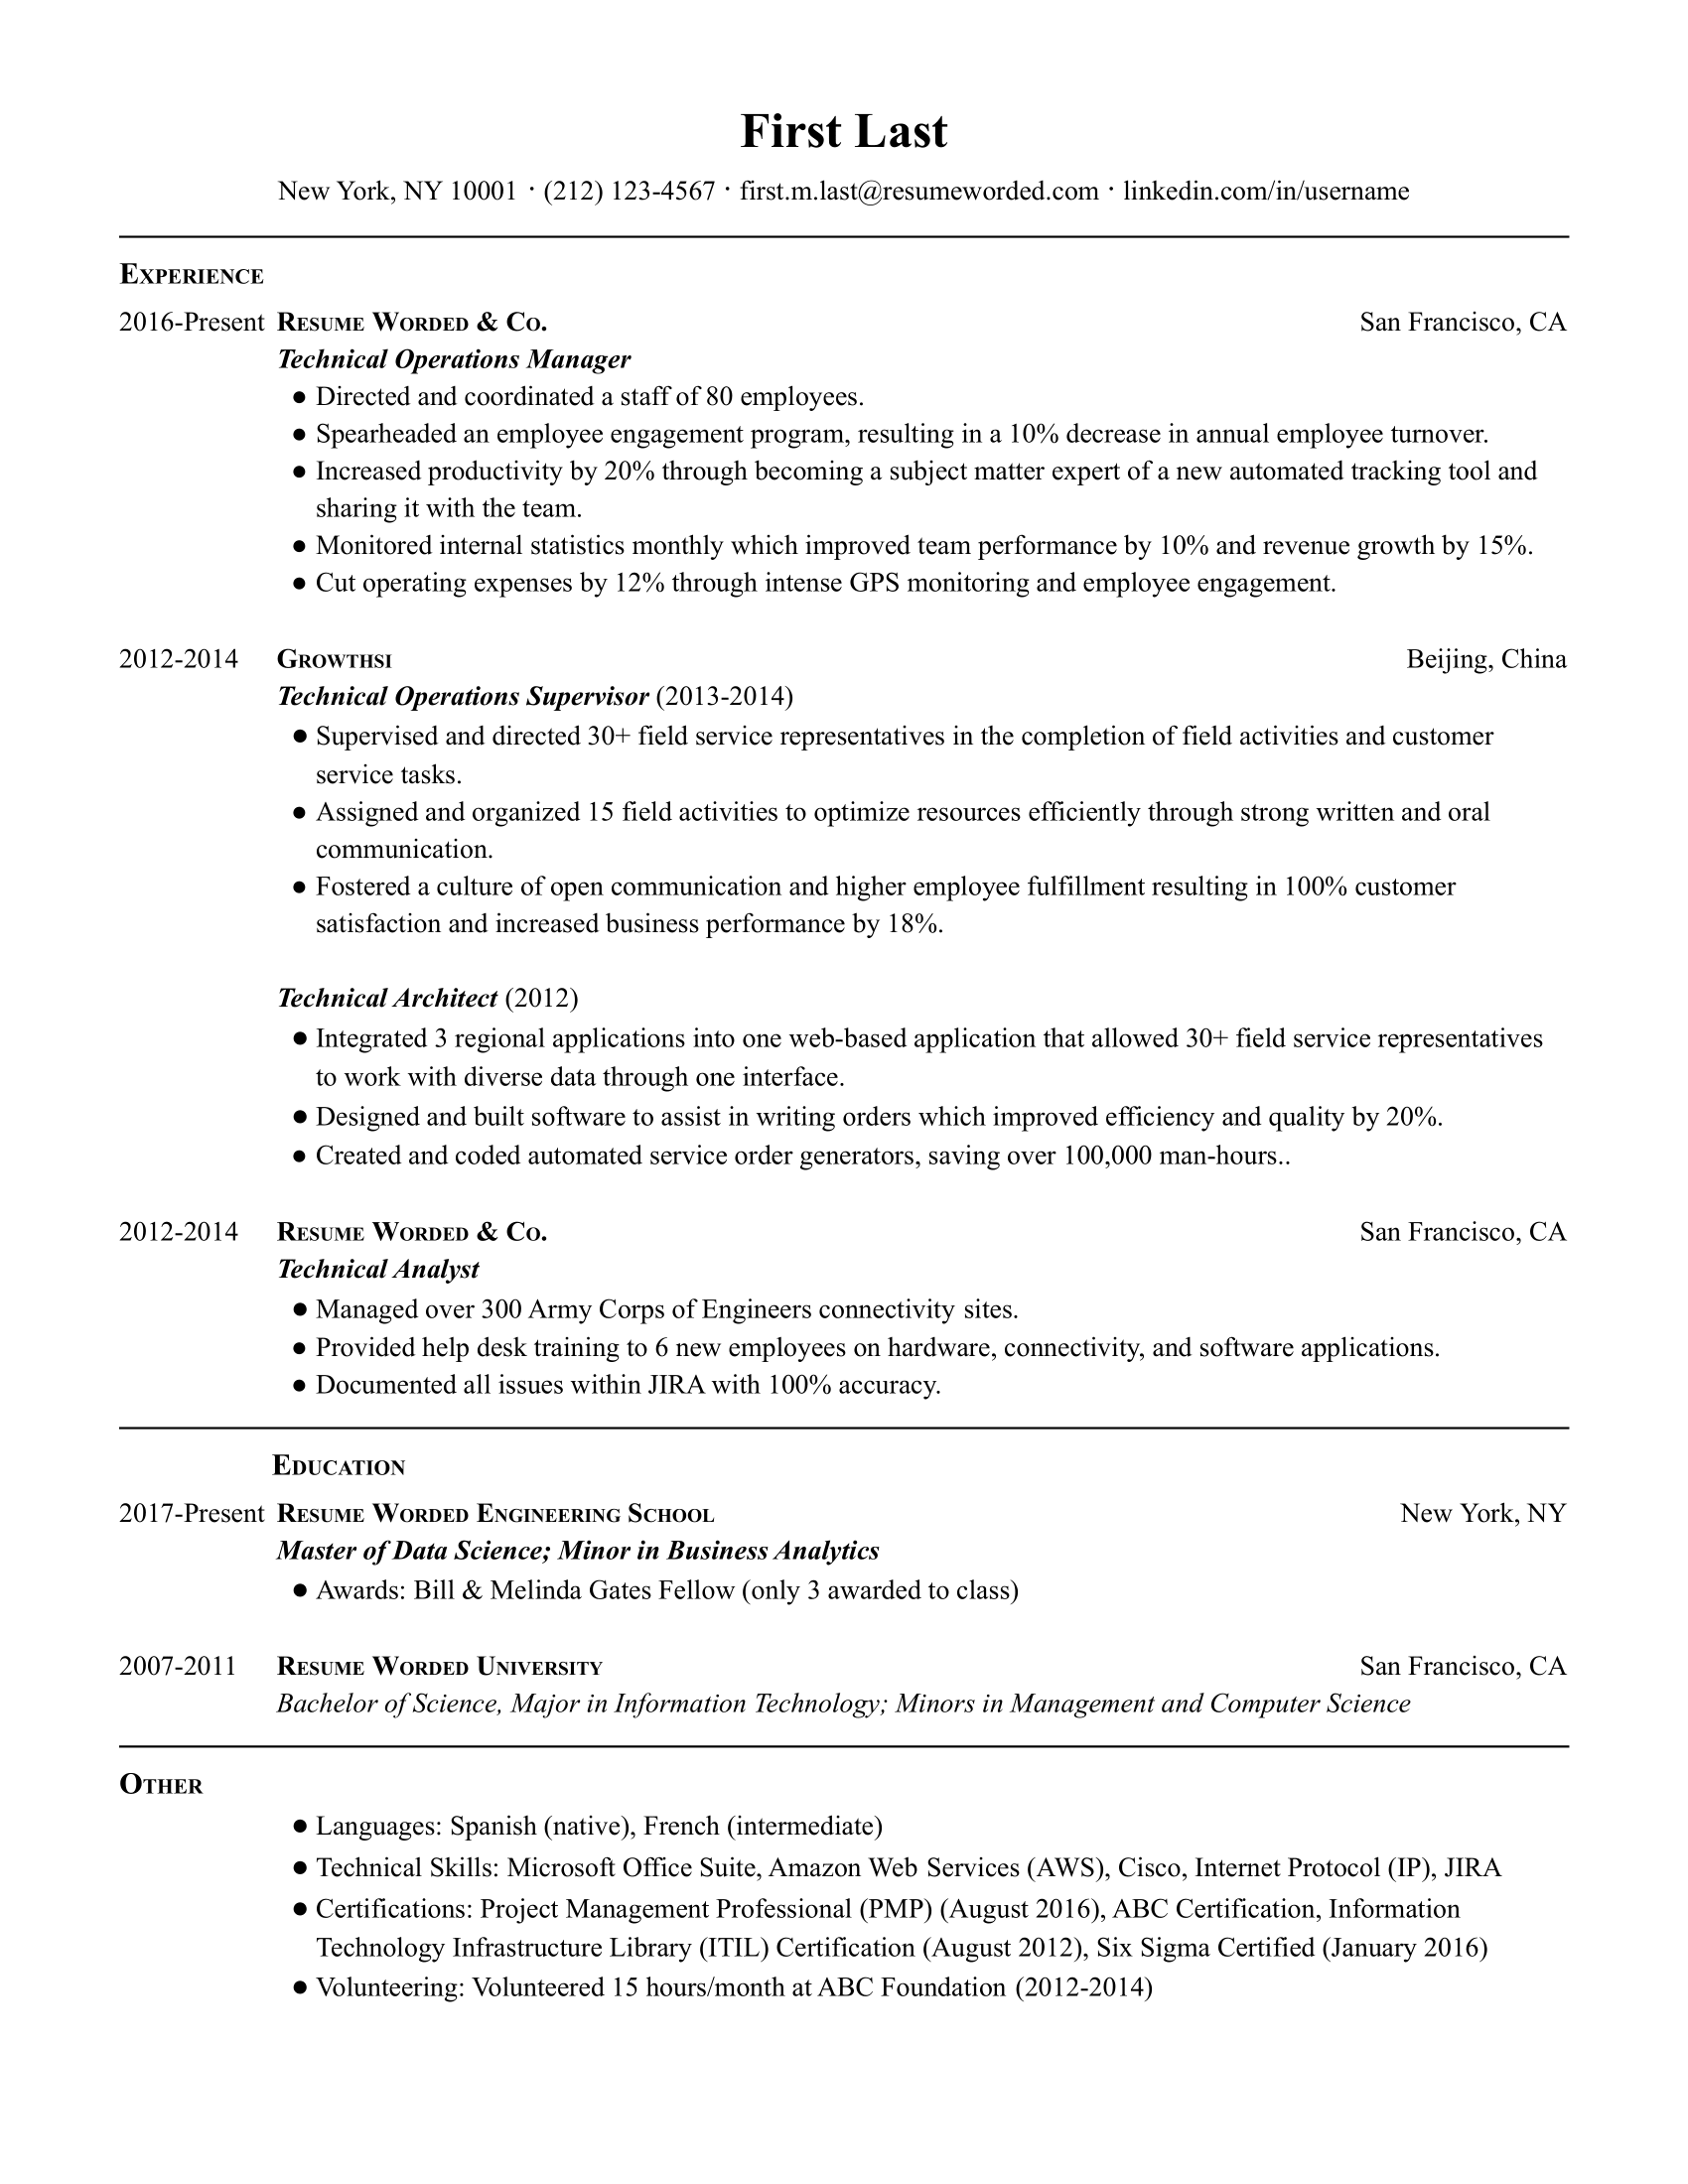 Technical operations manager resume template with technical background, management experience, and hard skills